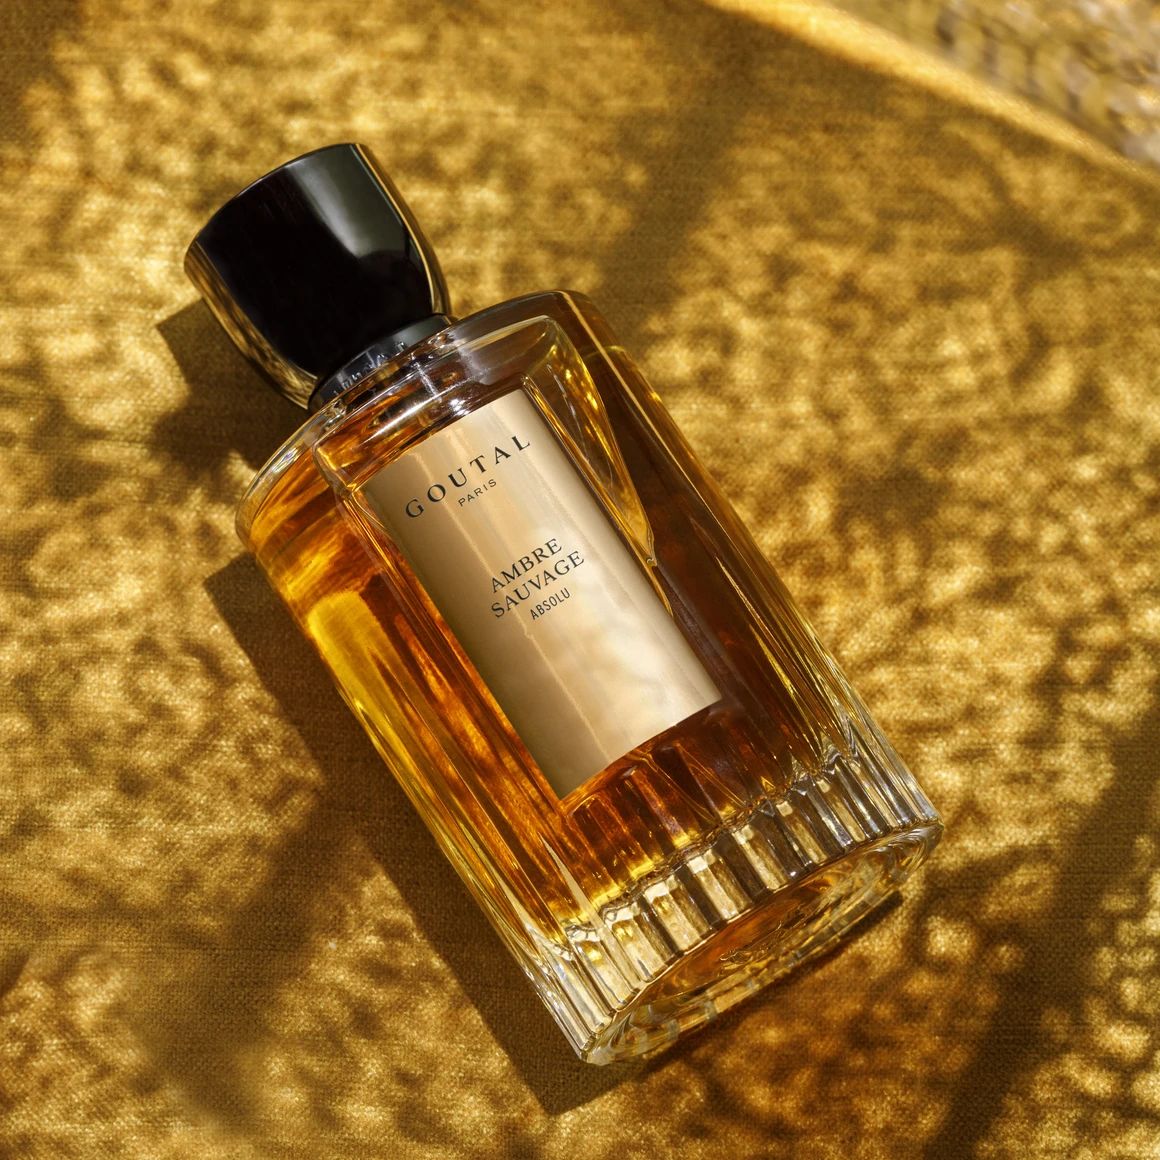 Ambre Sauvage Absolu 2020 Goutal perfume - a fragrance for women and ...